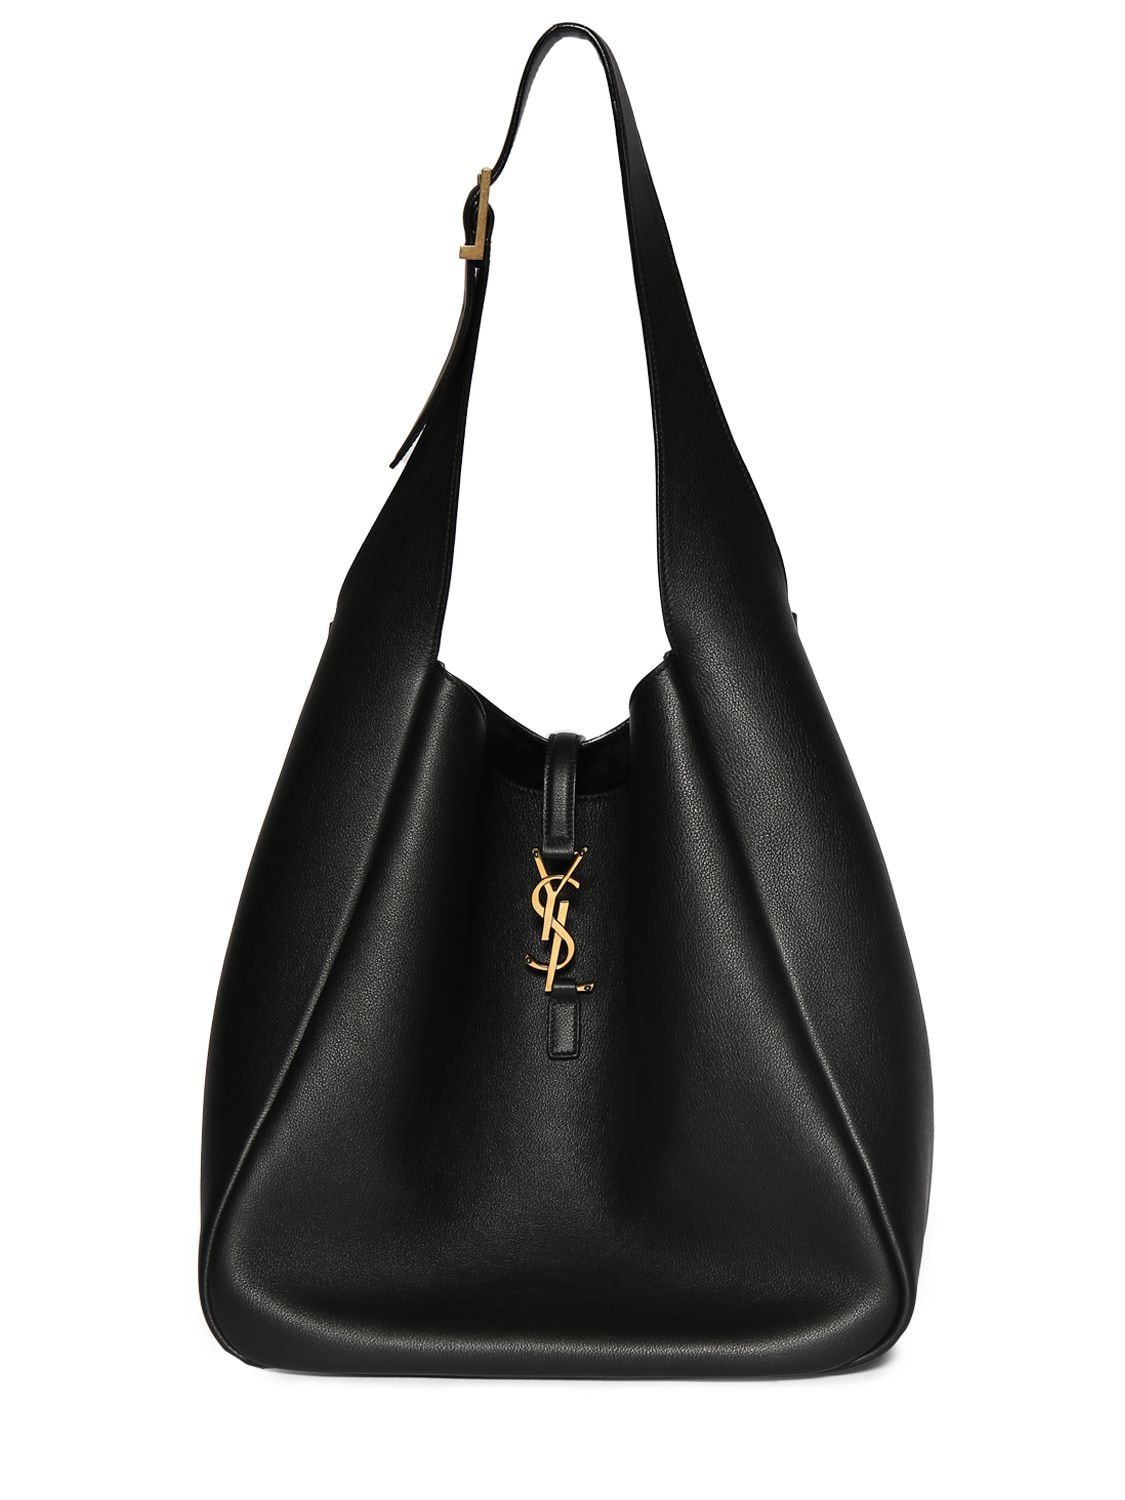 Large LE 5 À 7 supple in smooth leather, Saint Laurent